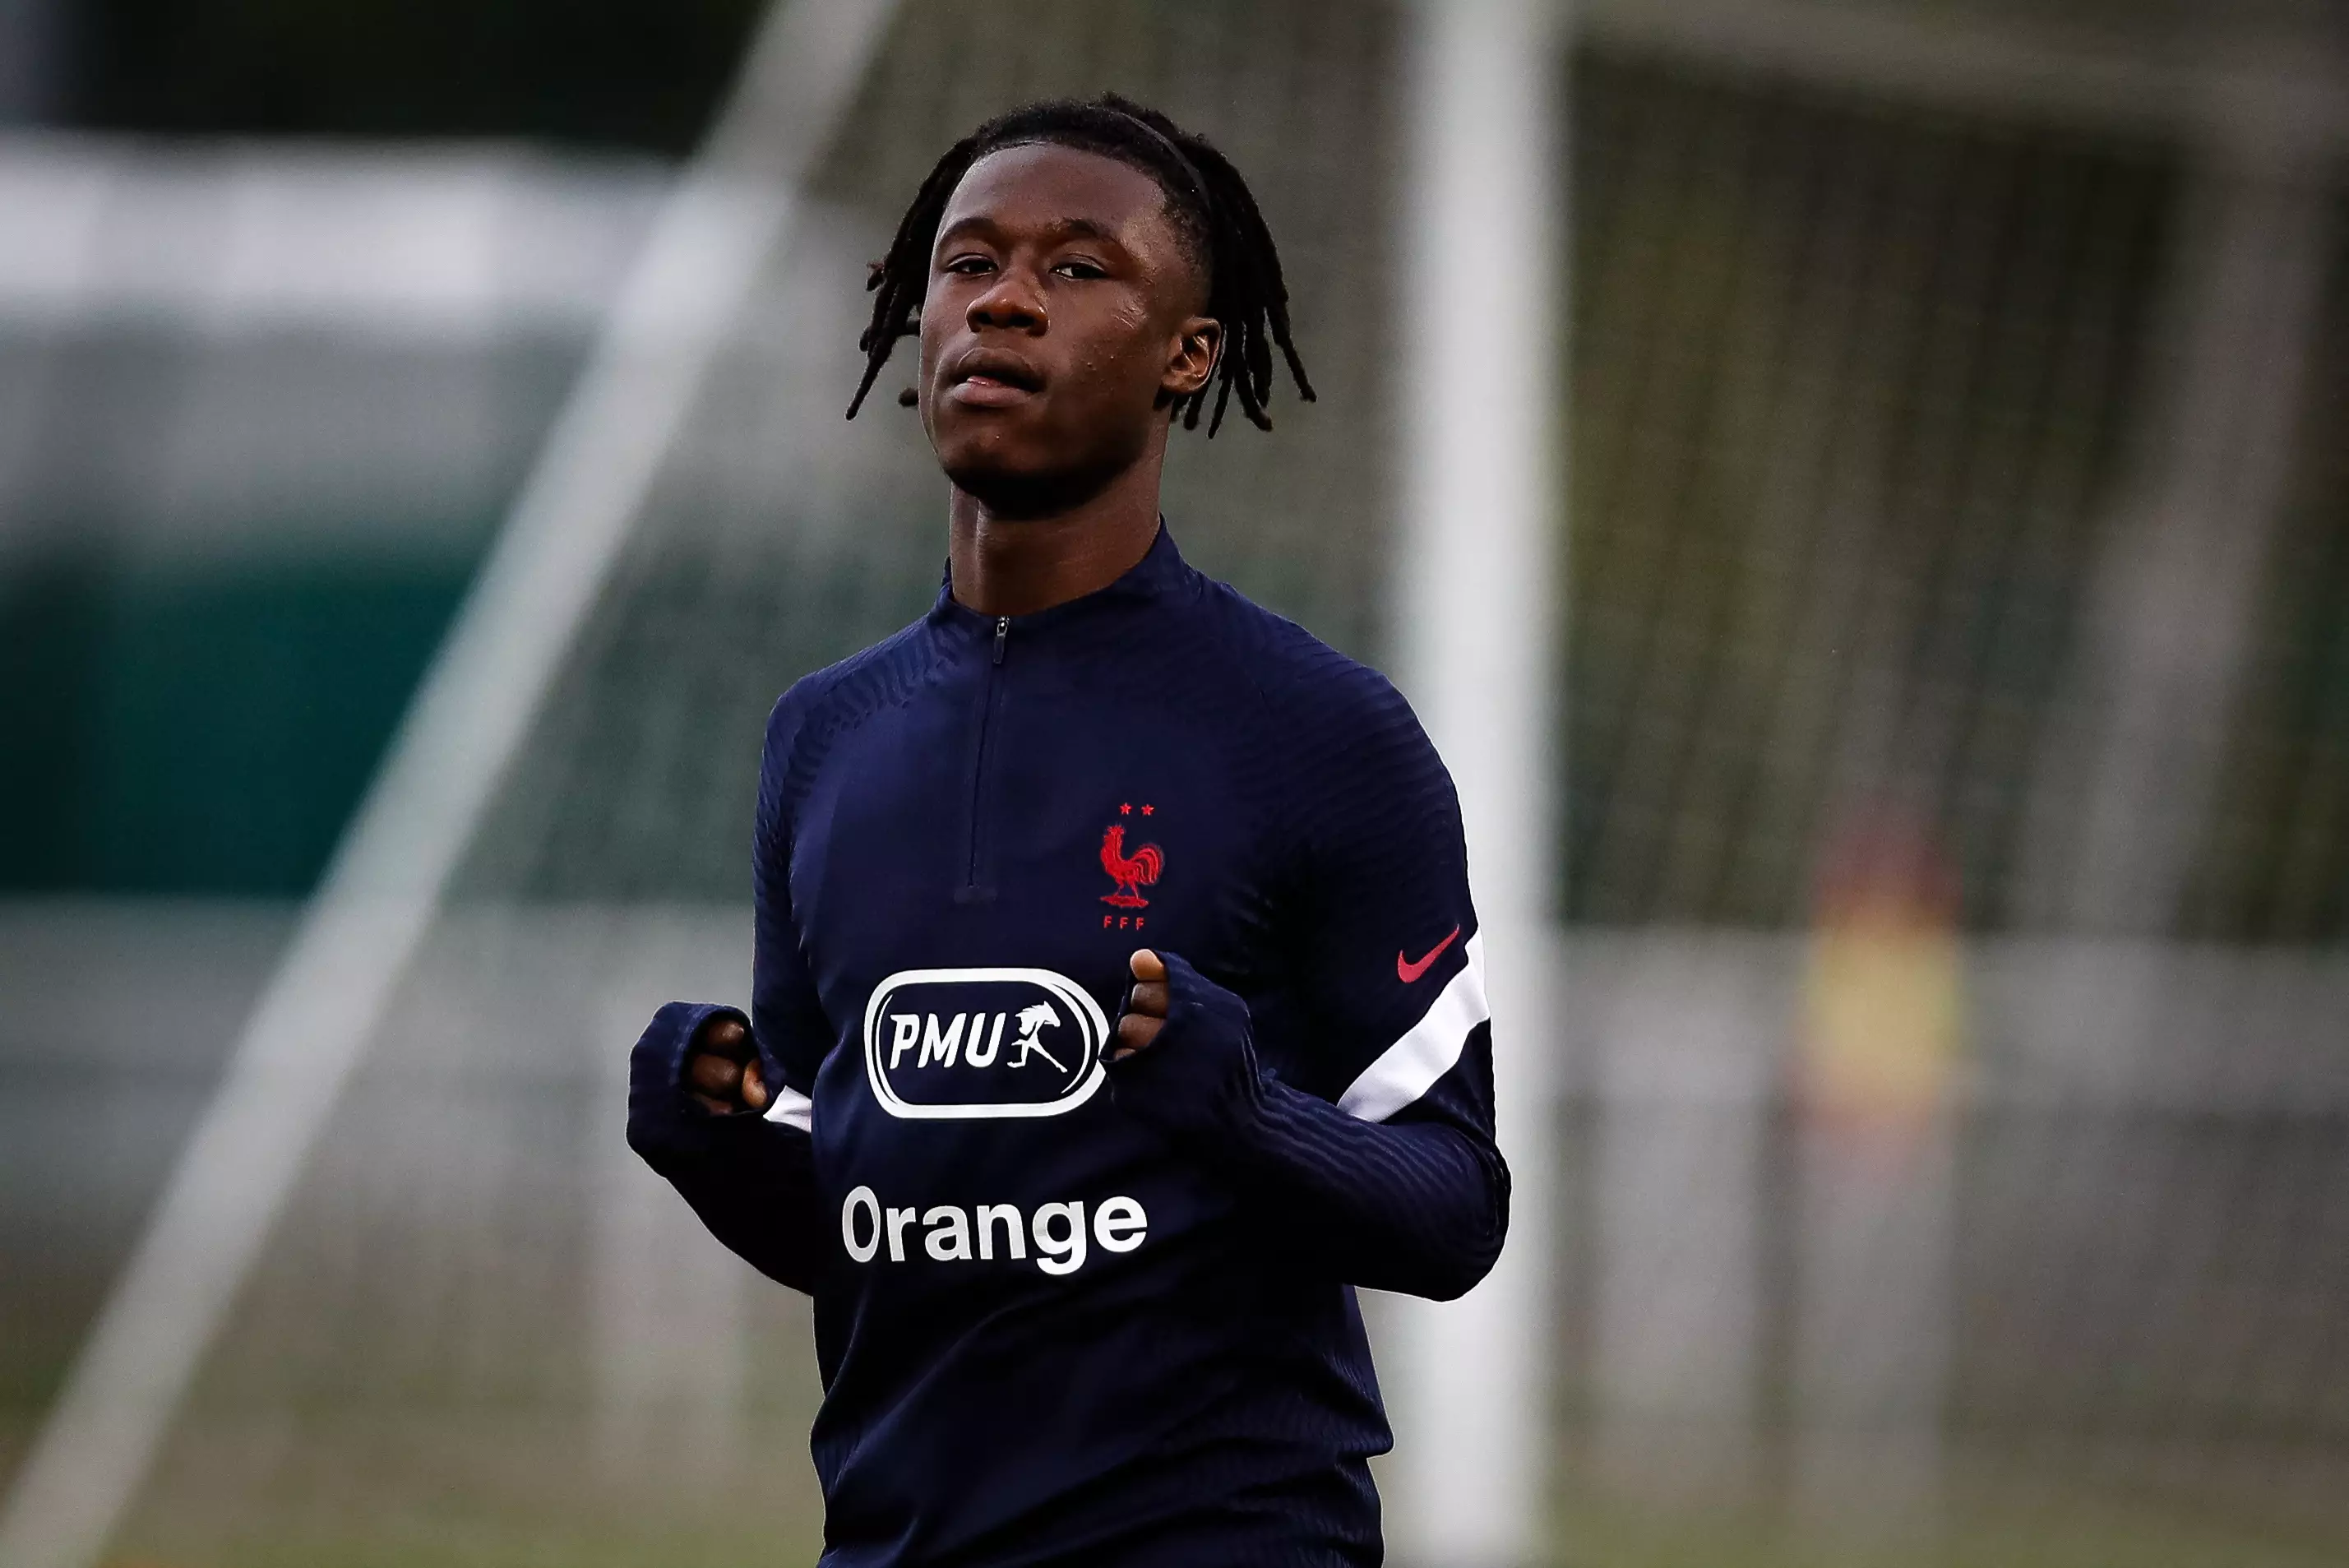 Camavinga could be a replacement for France teammate Pogba. Image: PA Images